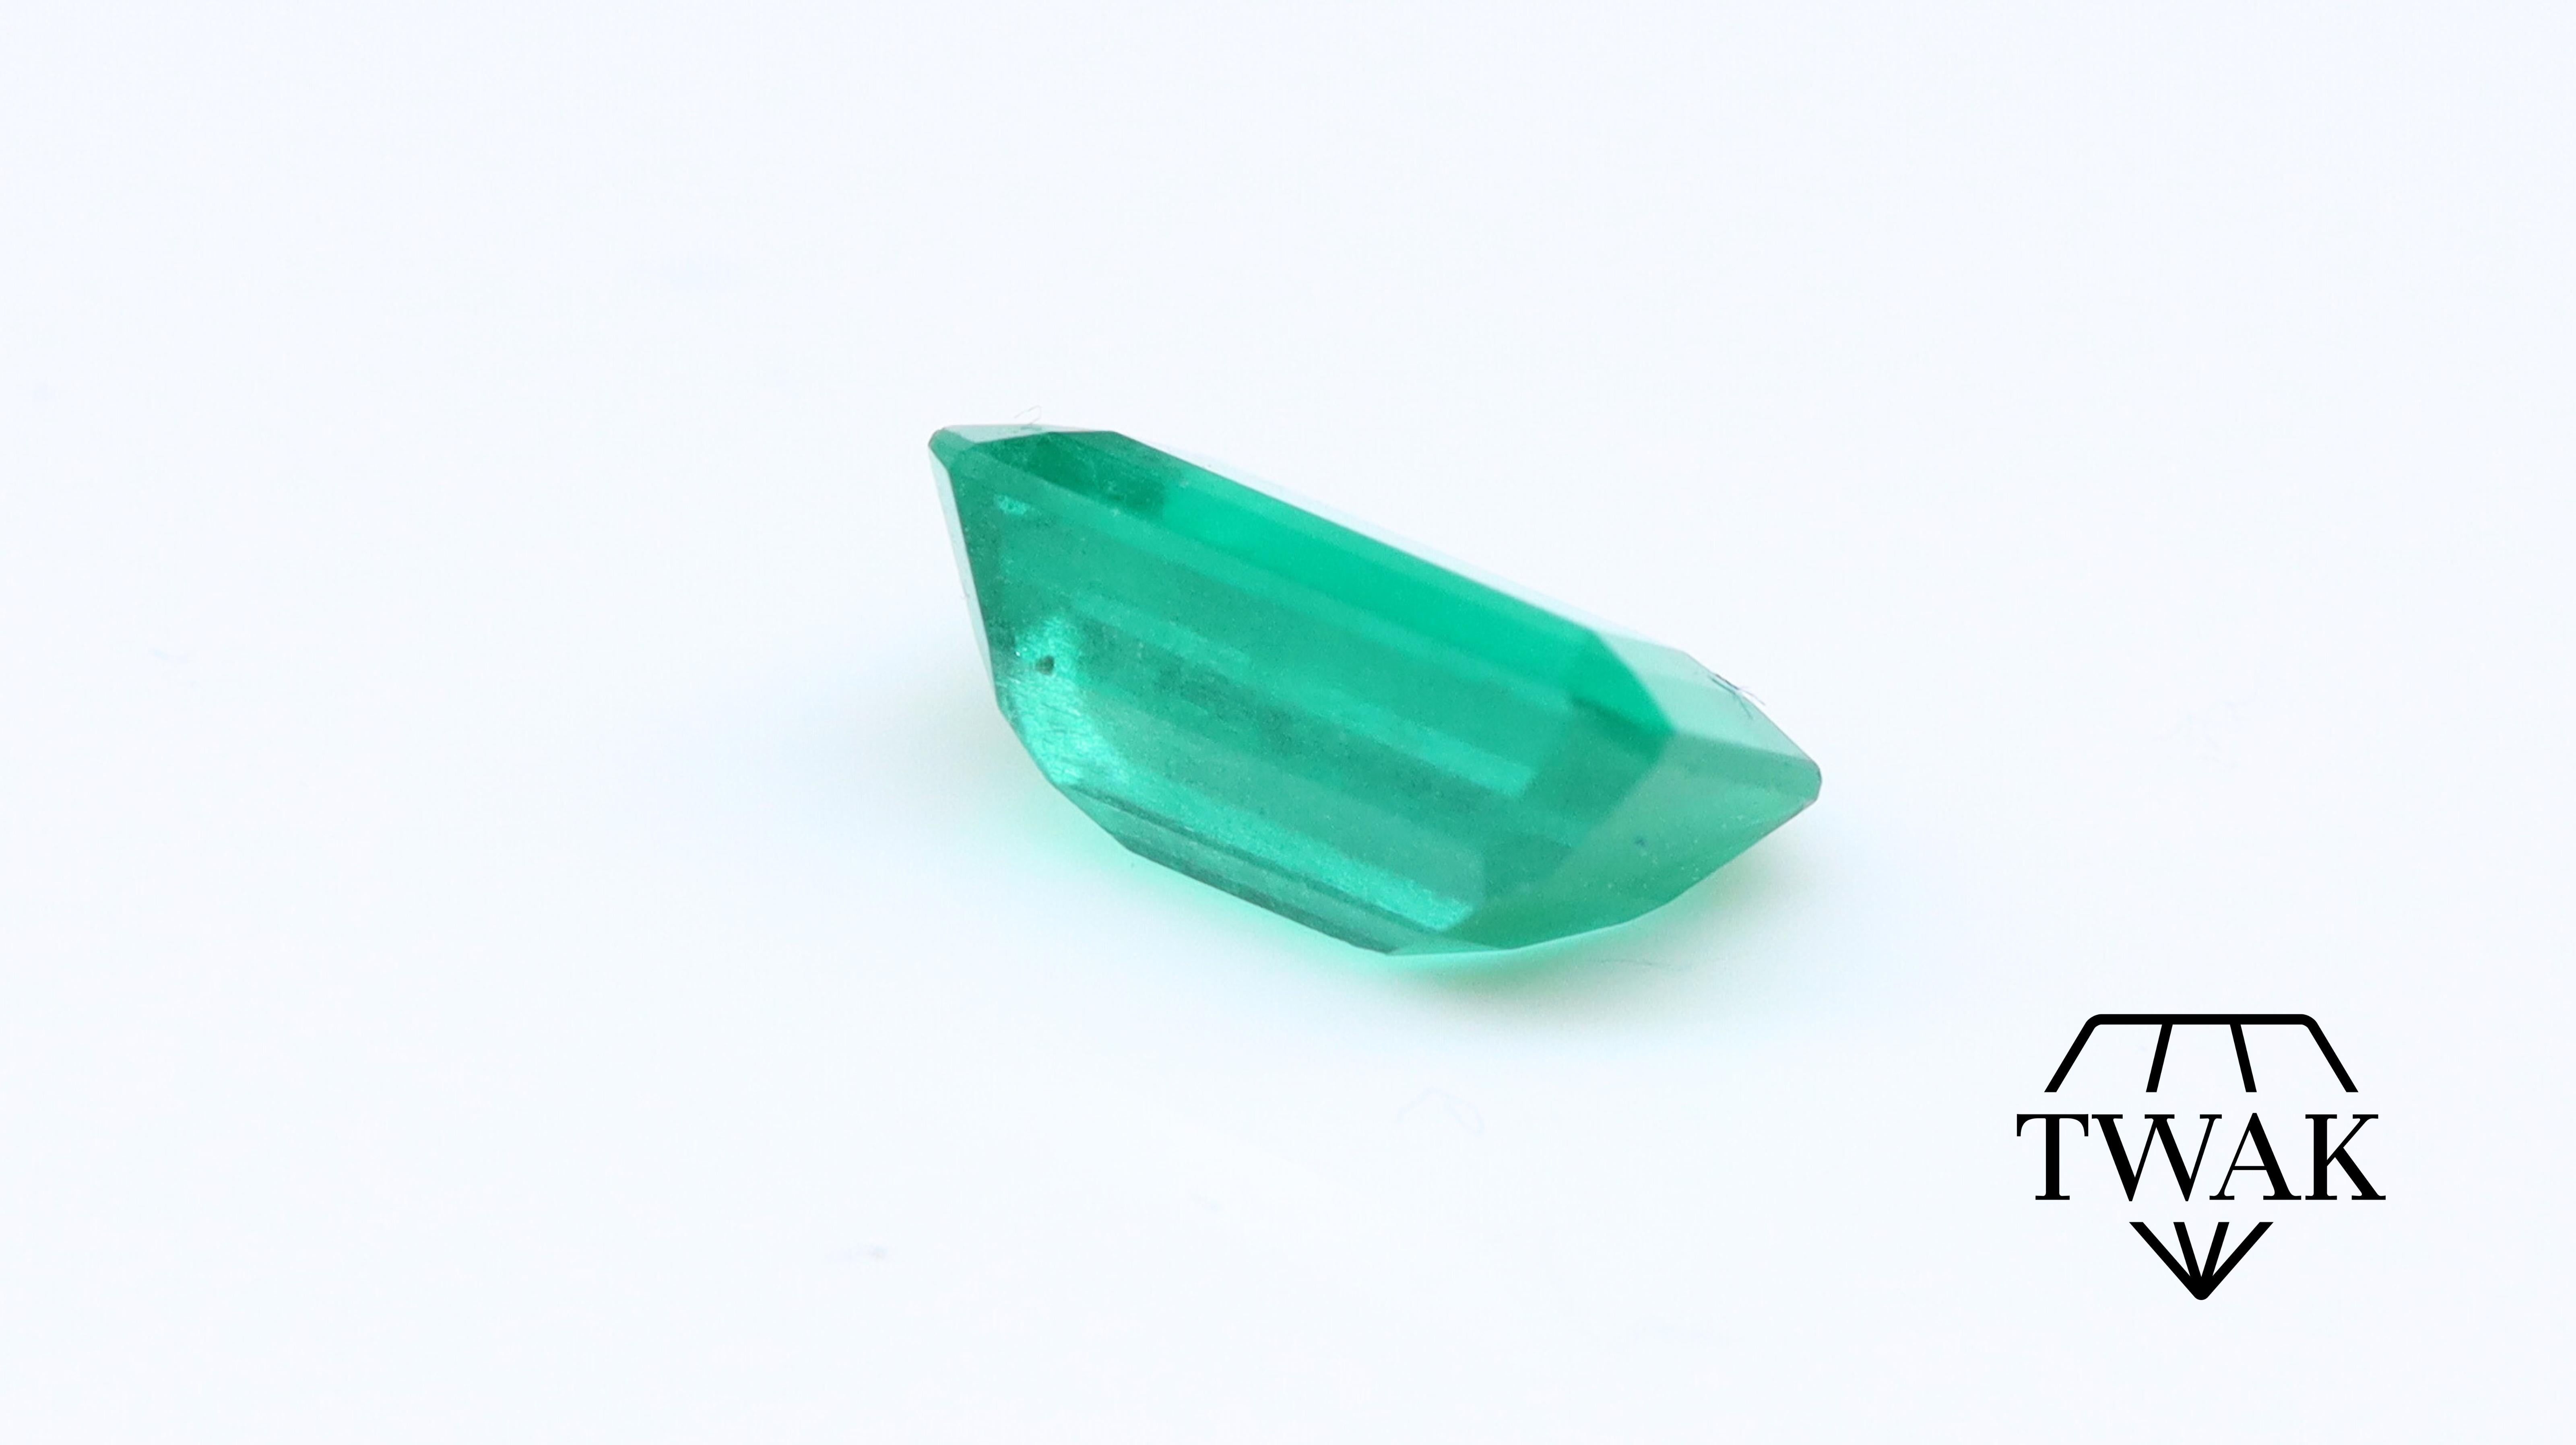 Women's or Men's Emerald 8x5mm 1.09ct For Sale